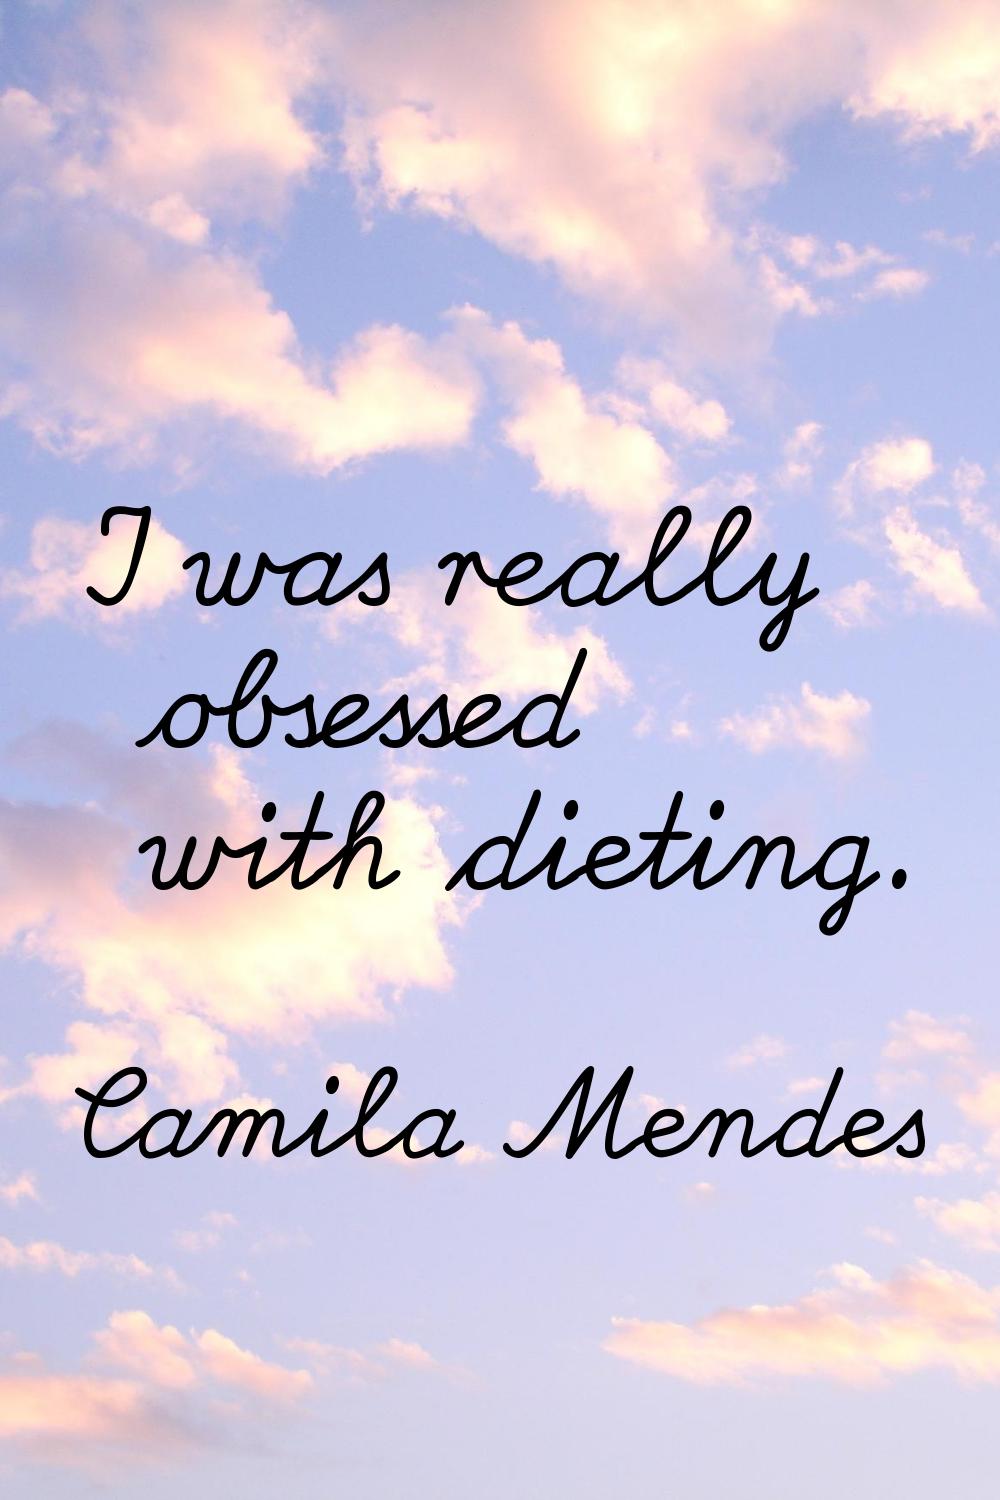 I was really obsessed with dieting.